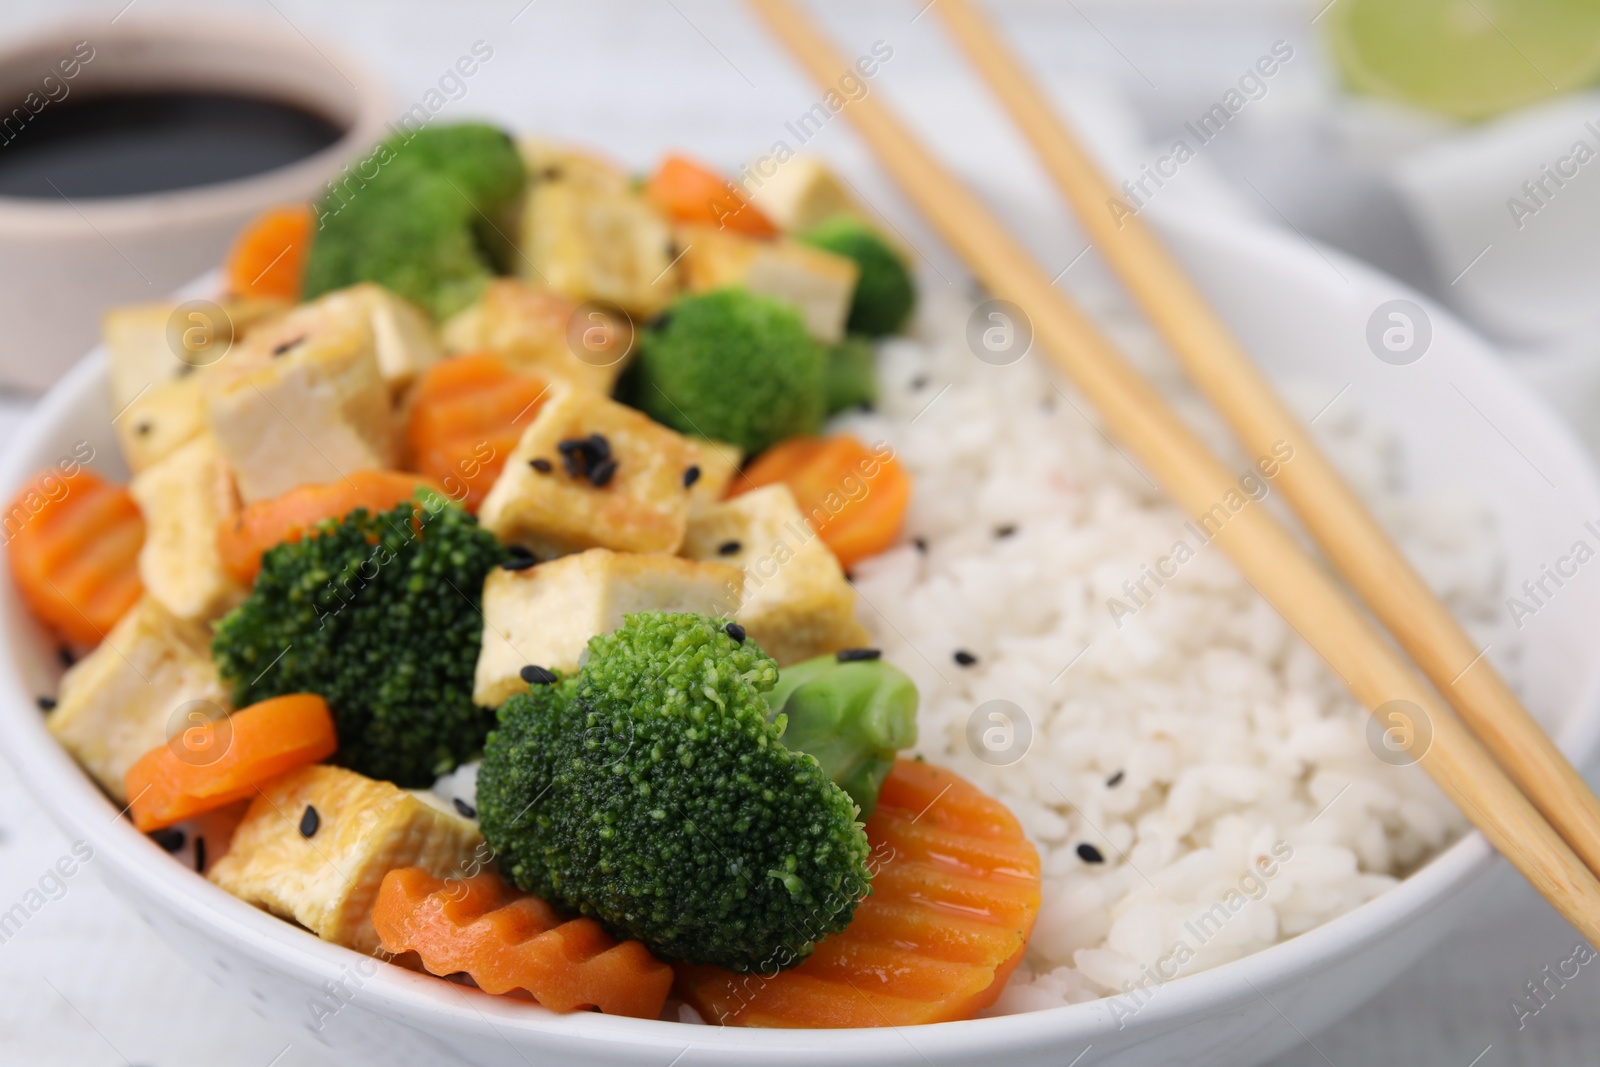 Photo of Bowl of rice with fried tofu, broccoli and carrots on table, closeup